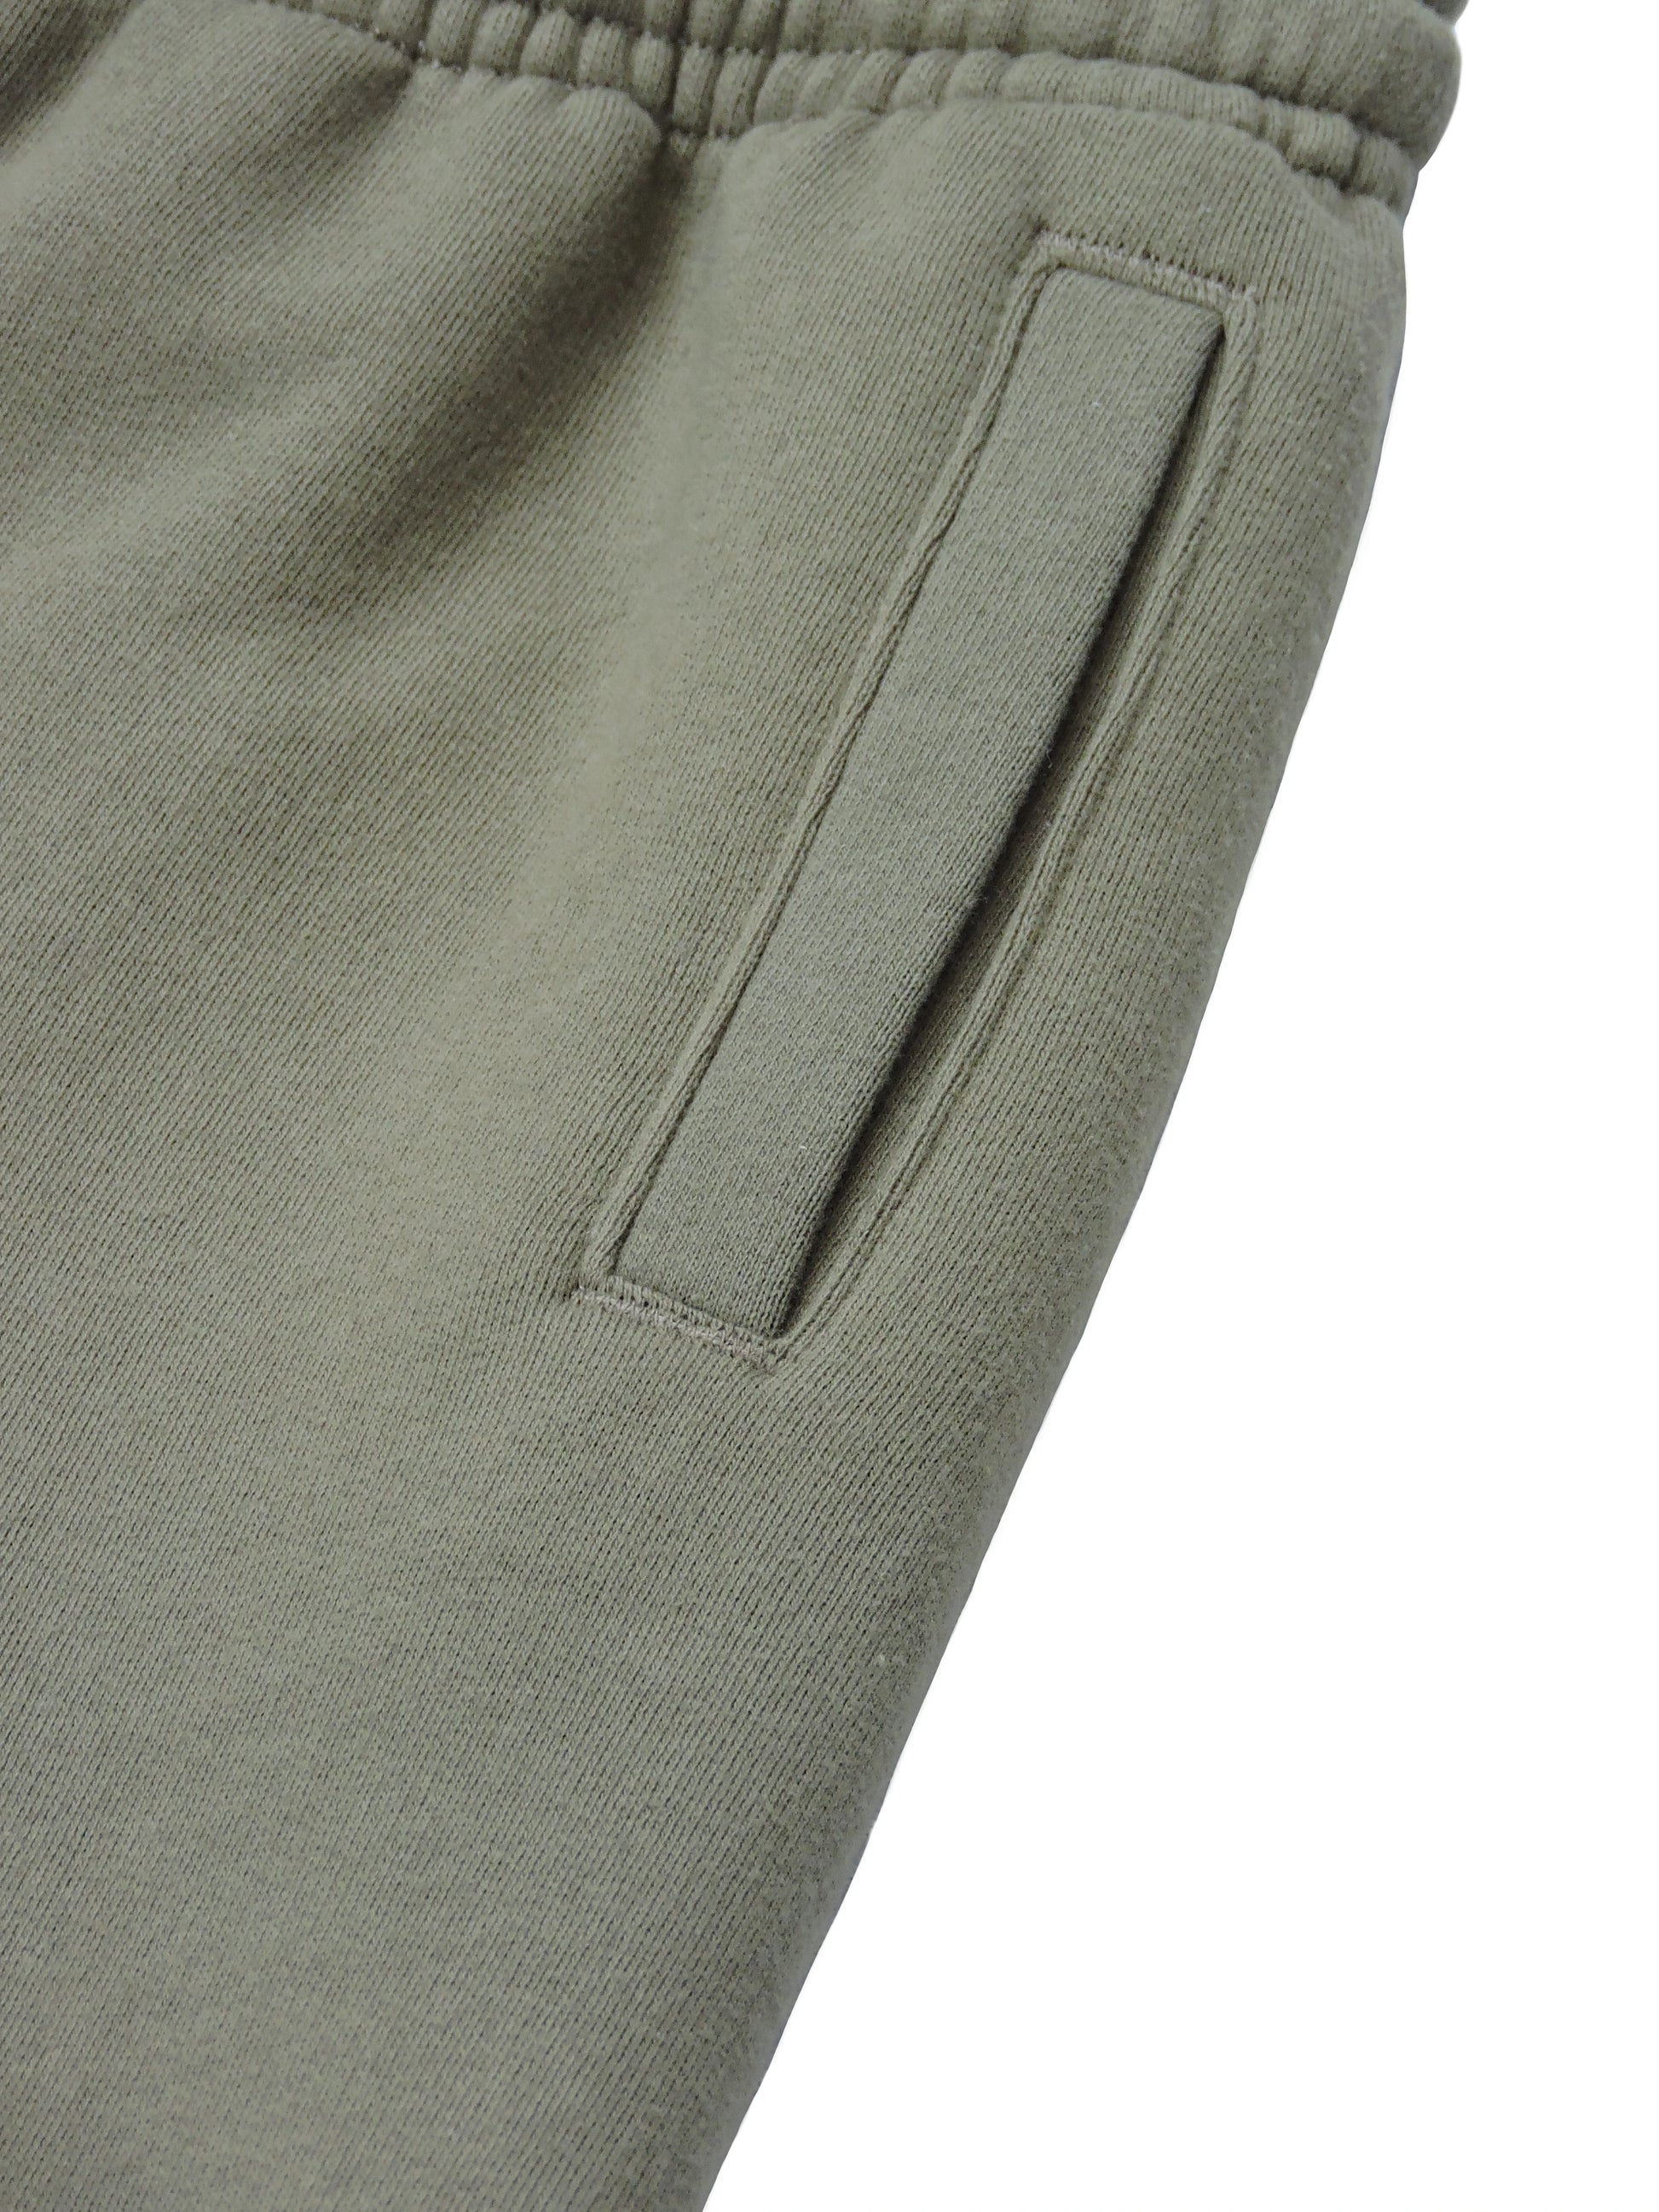 Close up of side pocket with tight fitted opening and deep pouches.